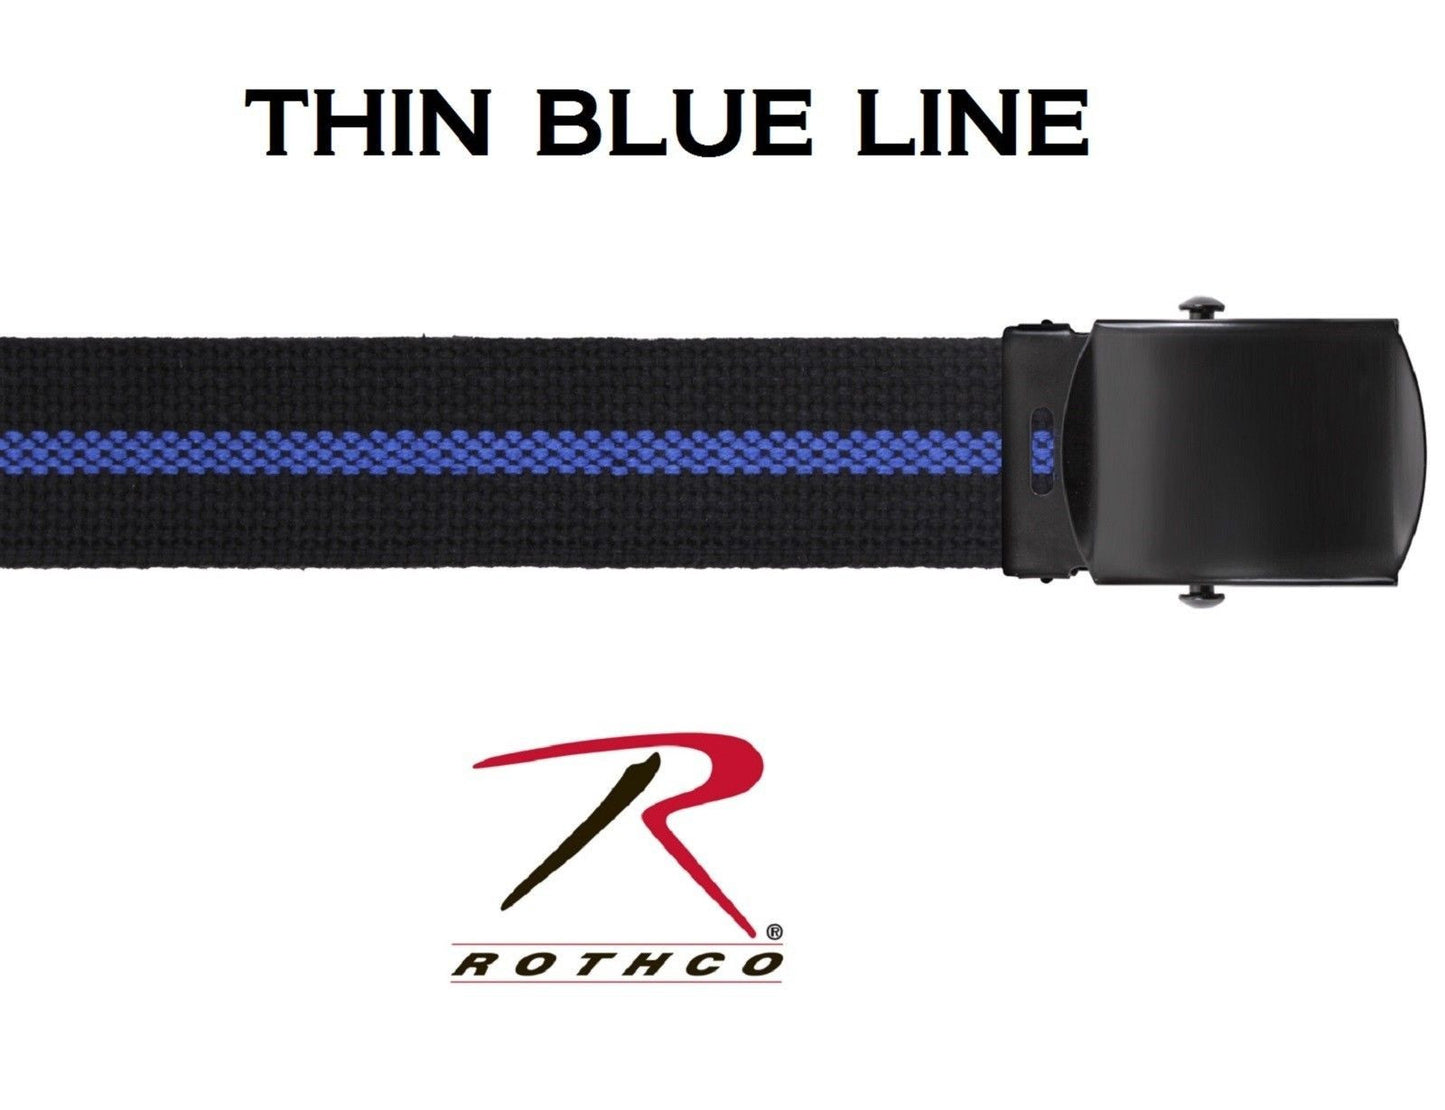 The Thin Blue Line Belt - 100% Cotton Rothco Black TBL Law Support Belts